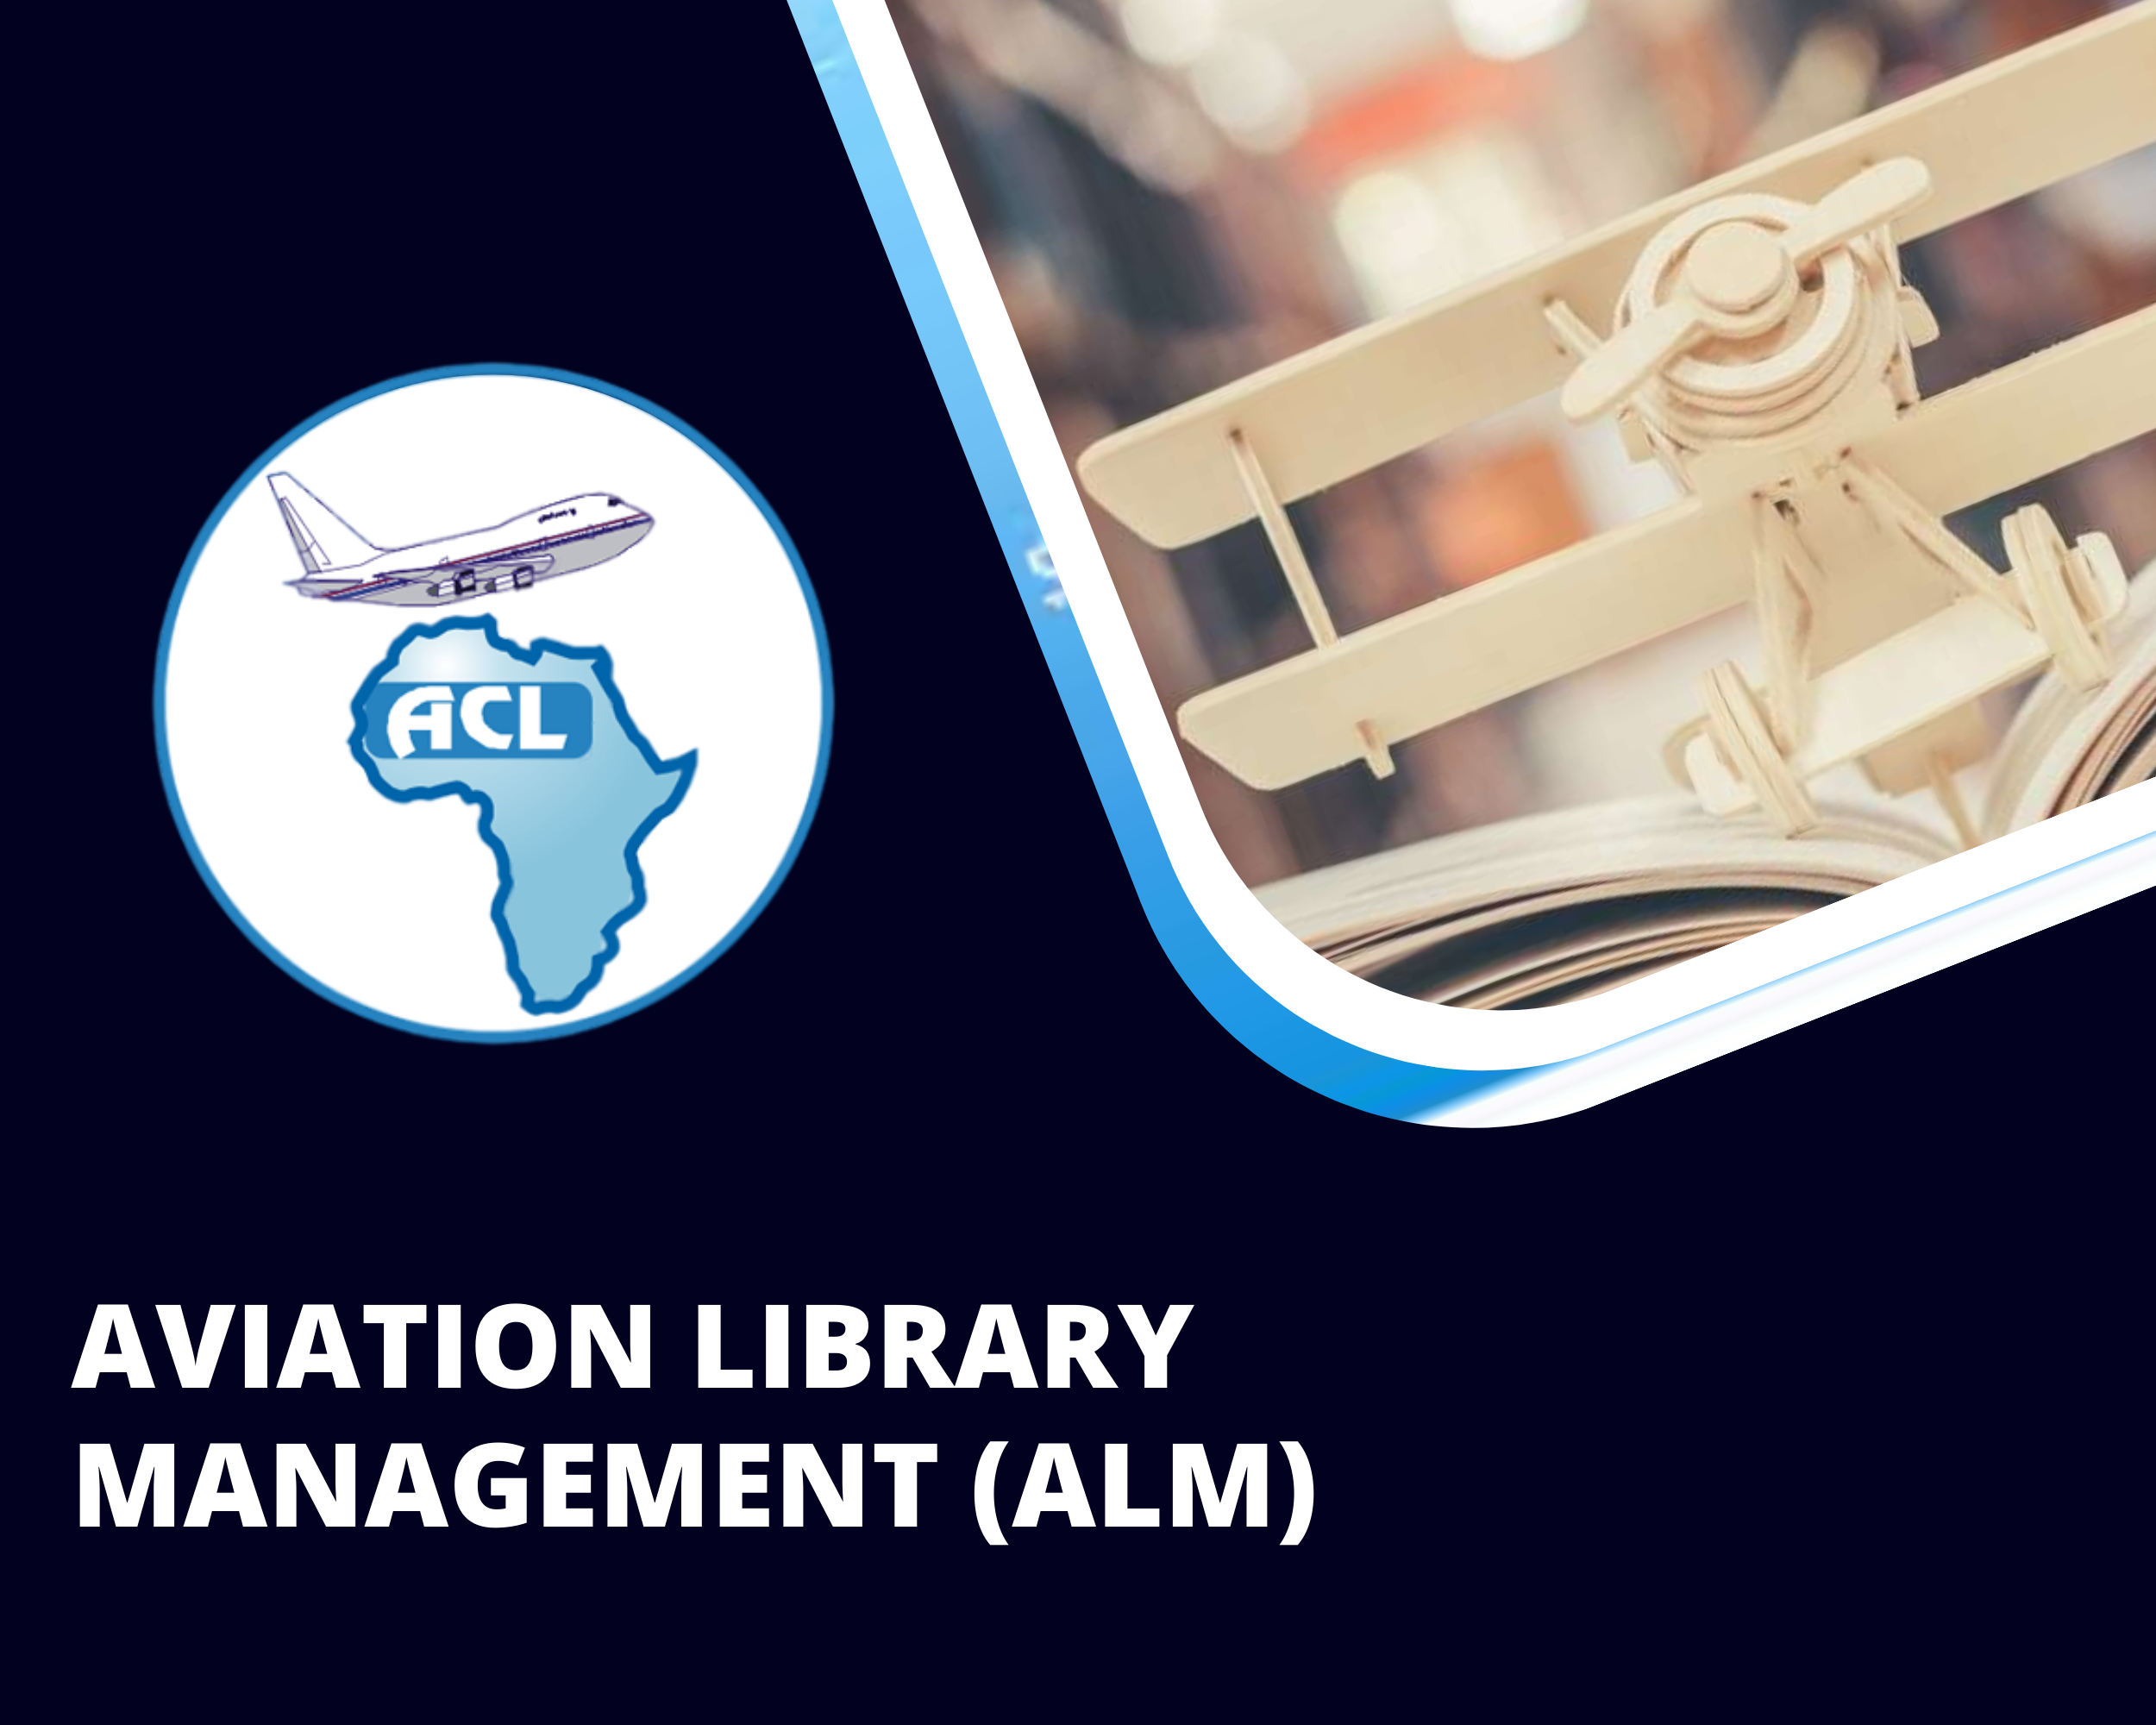 AVIATION LIBRARY MANAGEMENT (ALM)